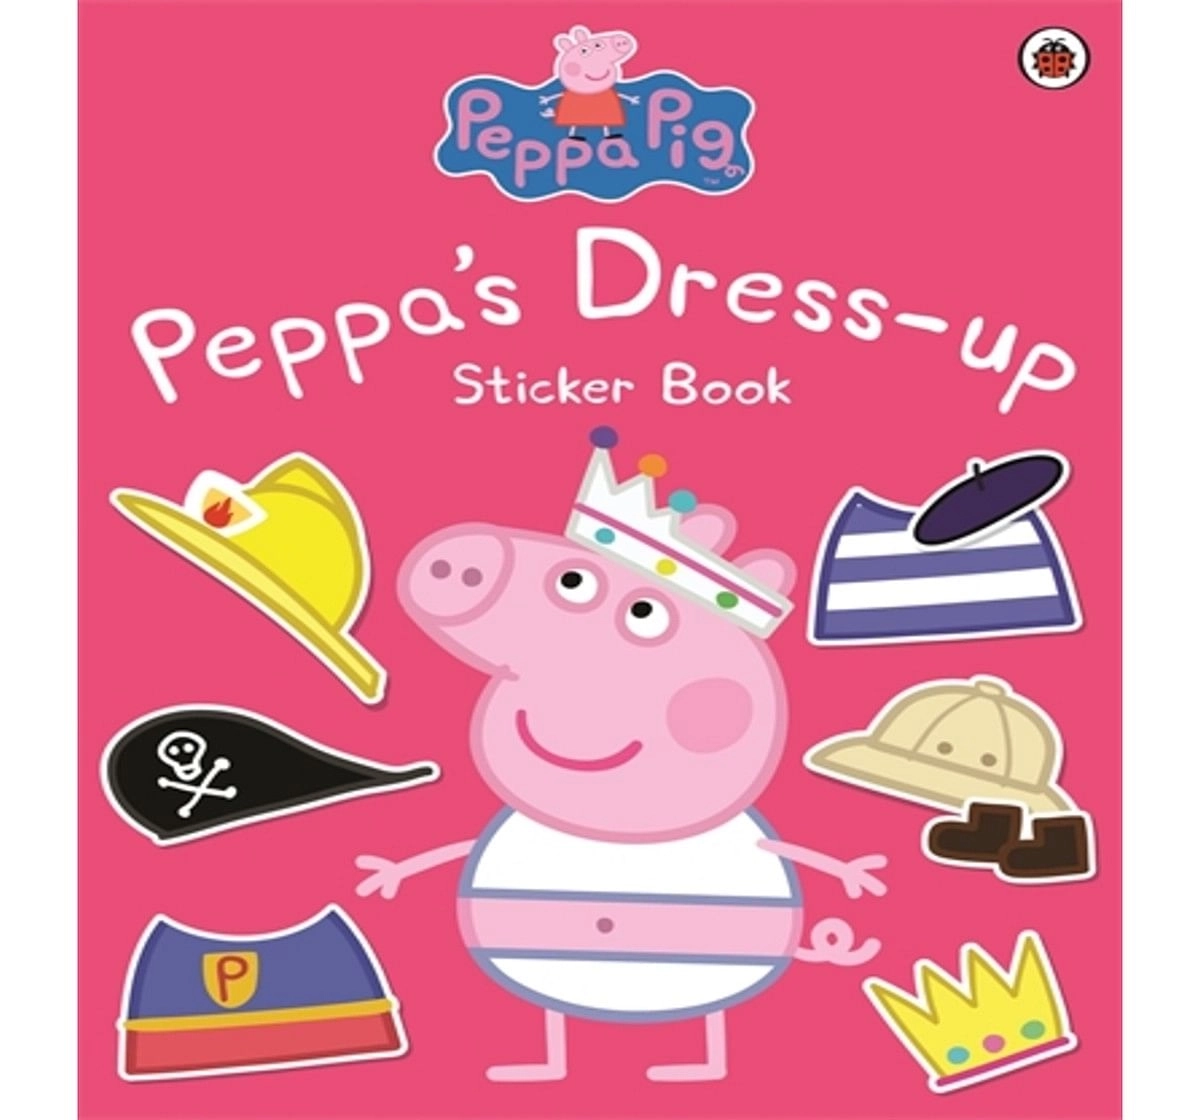 Peppa Pig : Peppa Dress: Up Sticker Book, 24 Pages Book by Ladybird, Paperback